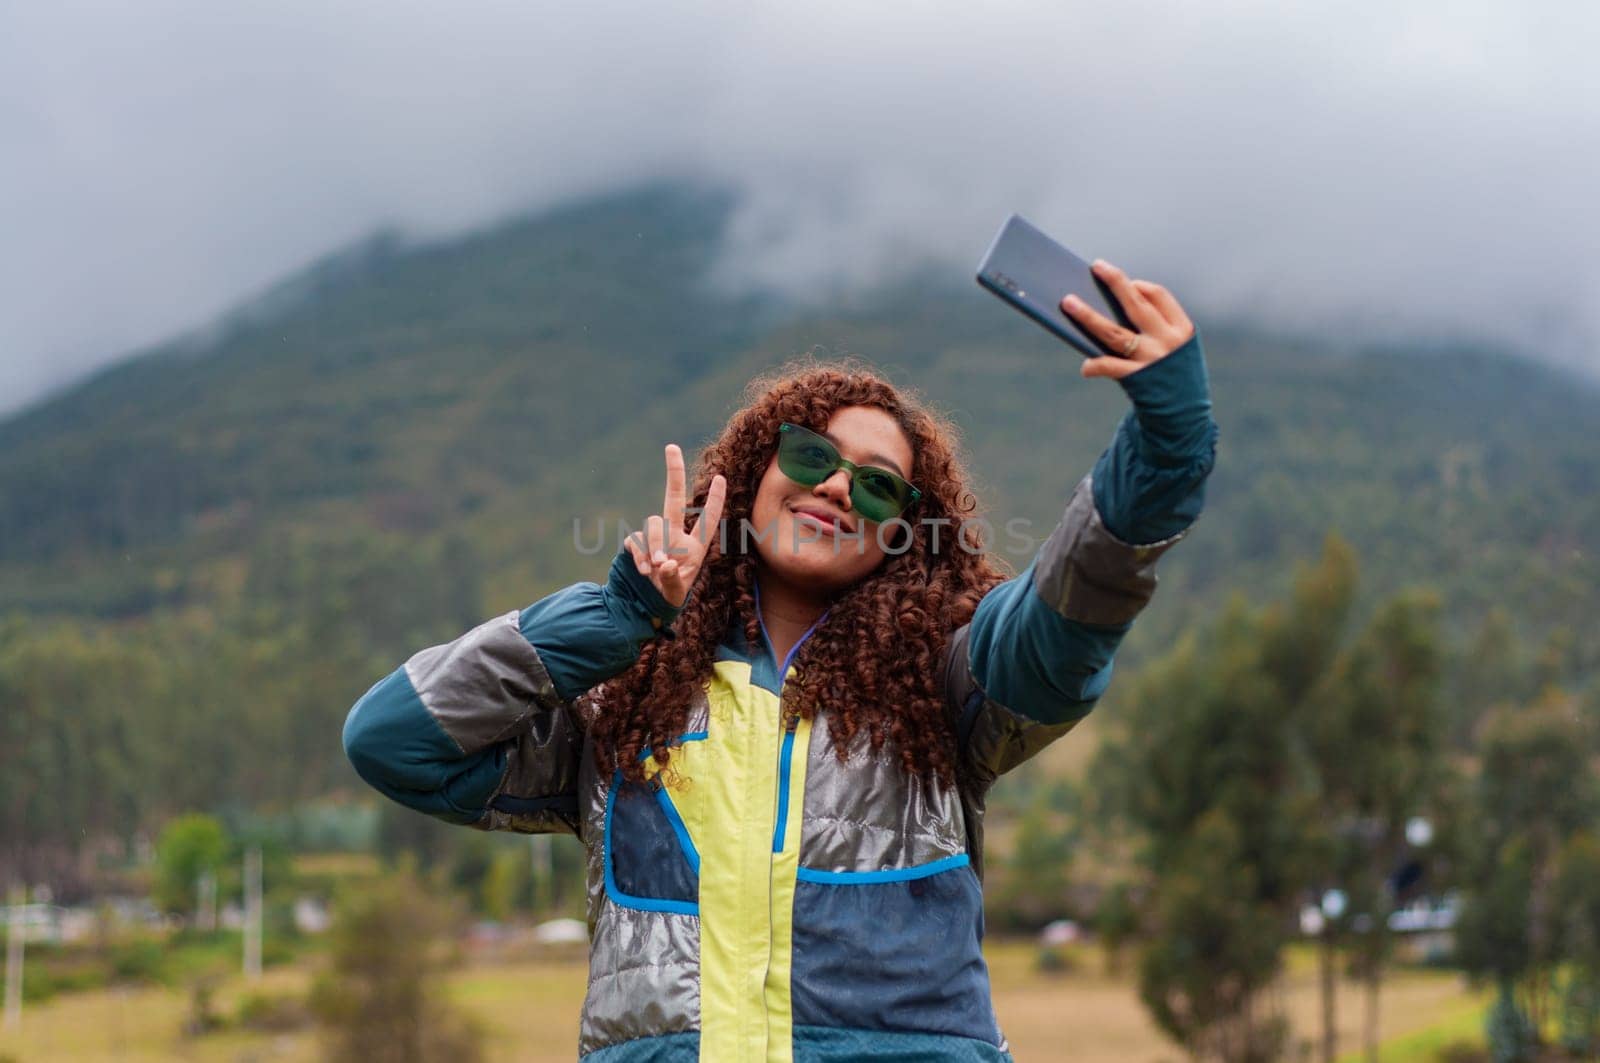 teenage rural tourism influencer from ecuador creating with had for her followers smiling and making victory sign with her fingers. by Raulmartin